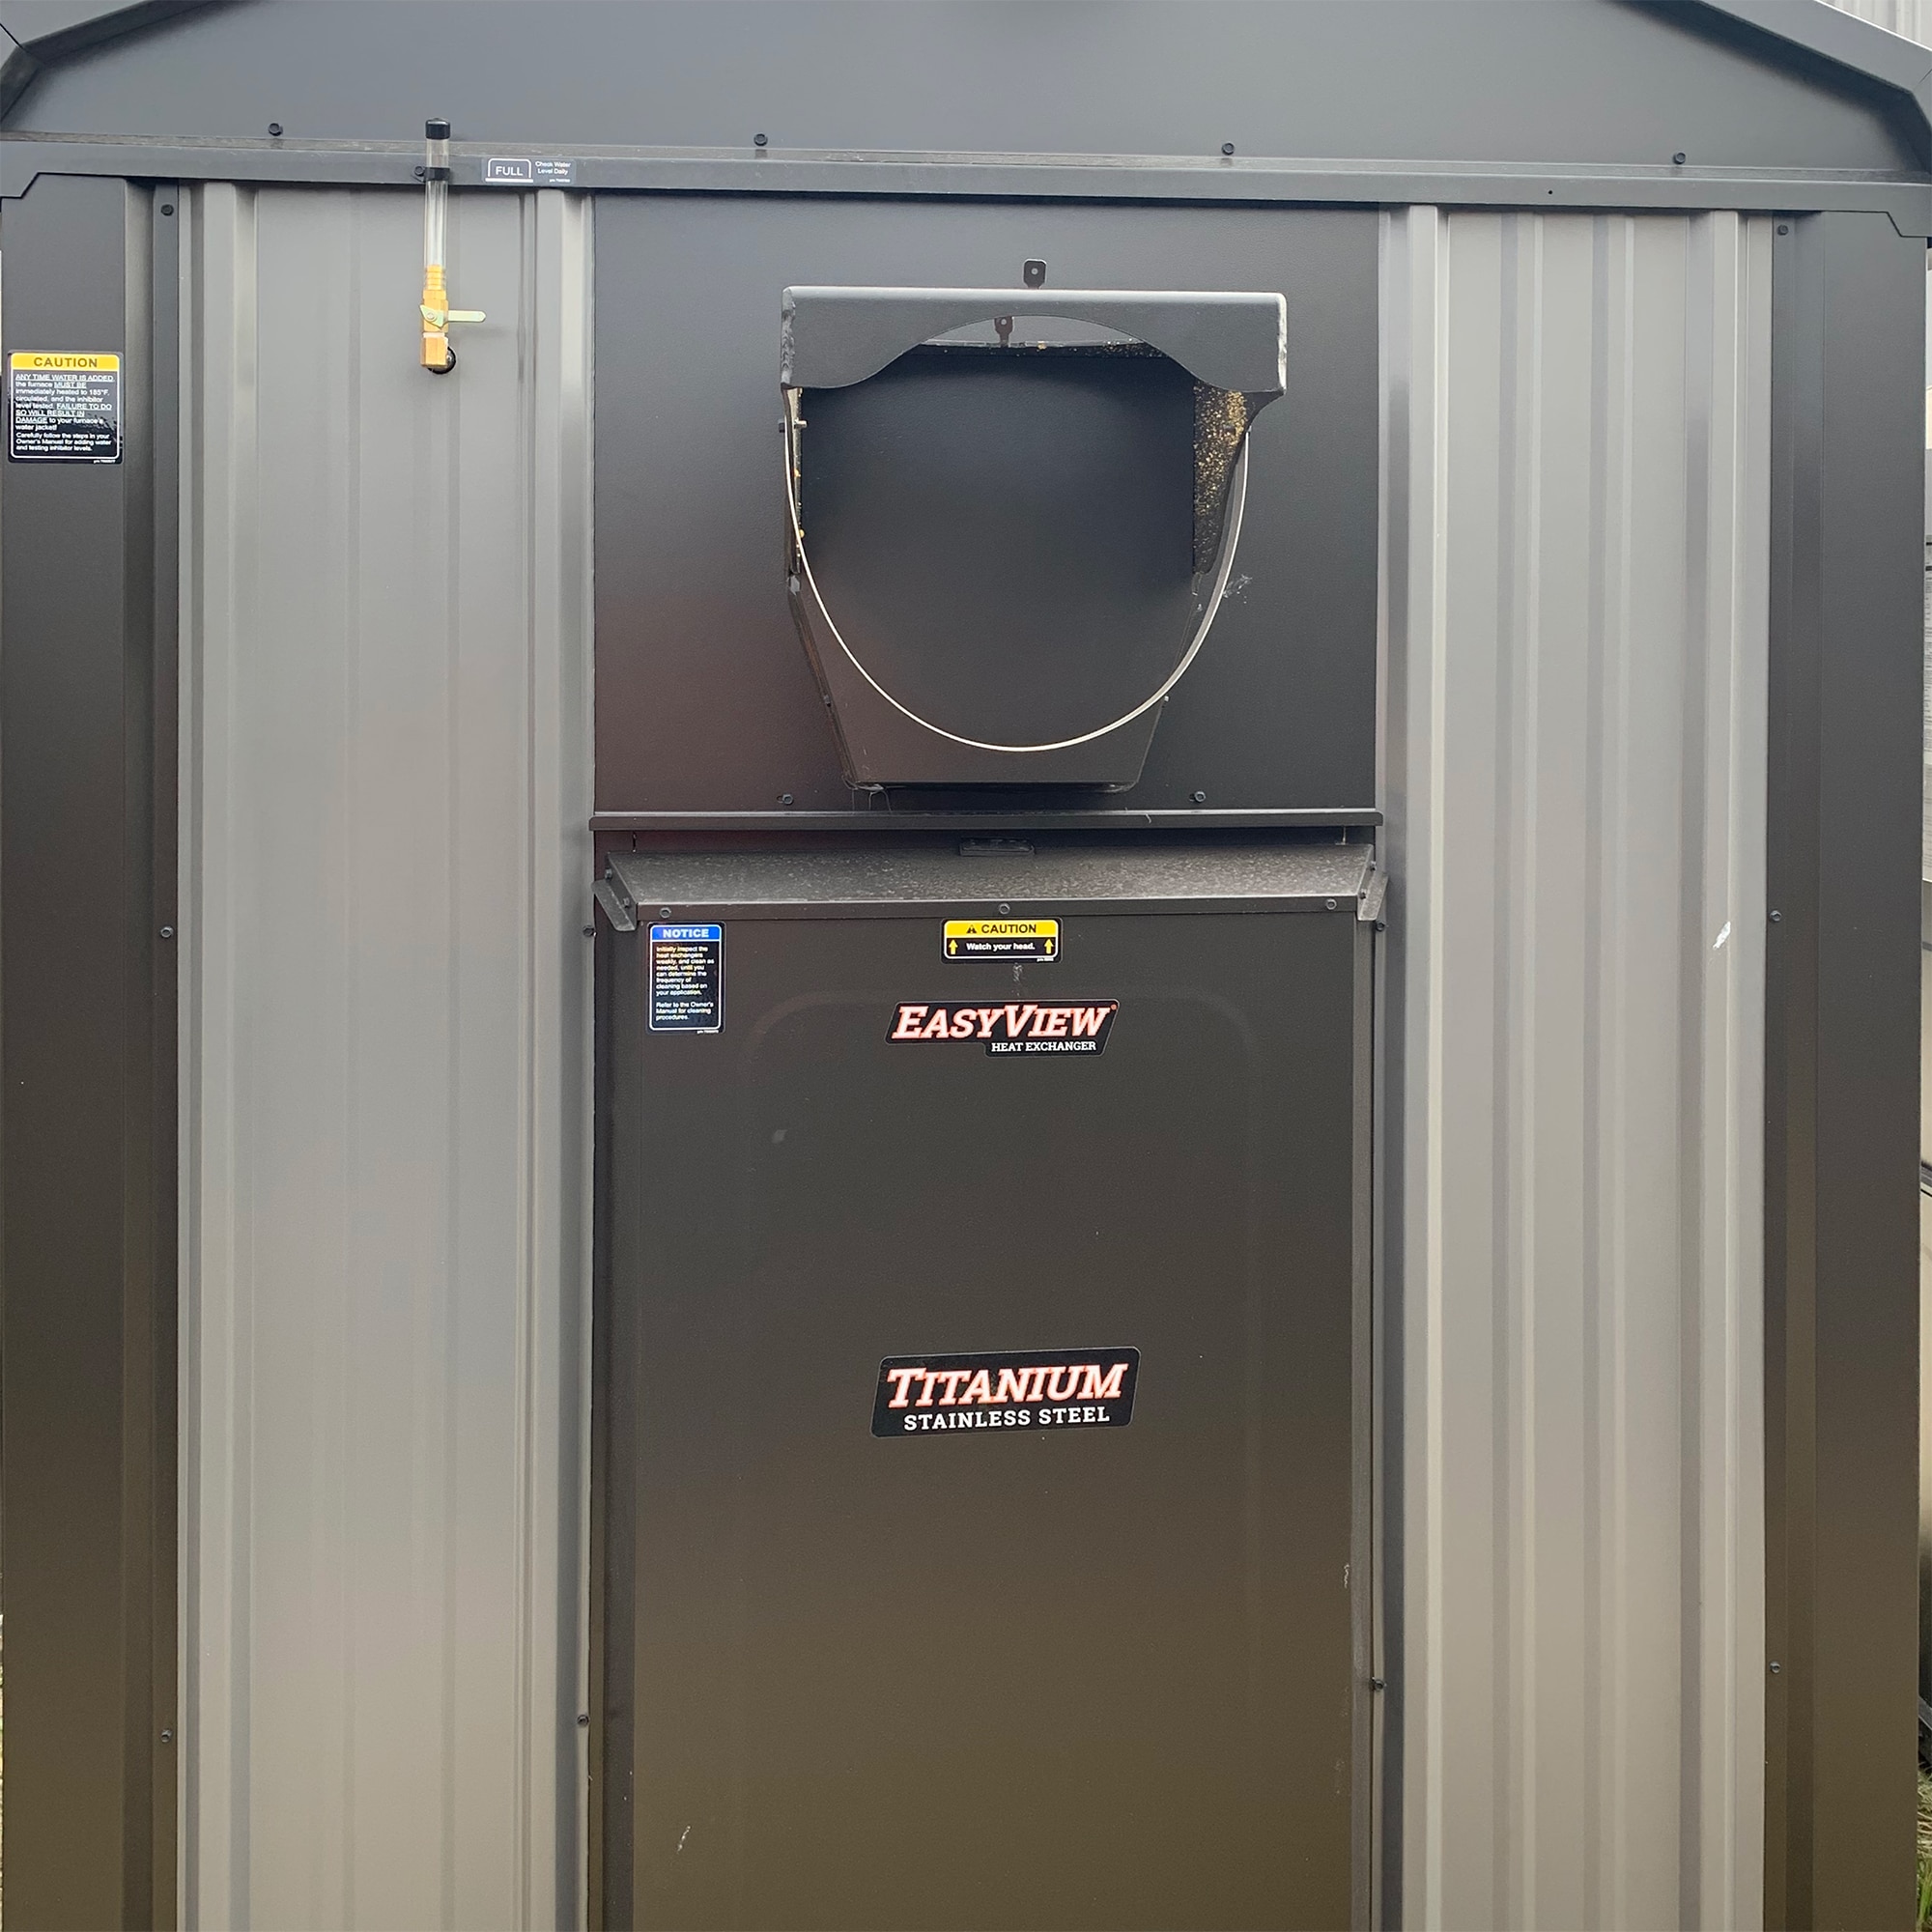 How Efficient are Outdoor Wood Furnaces? –